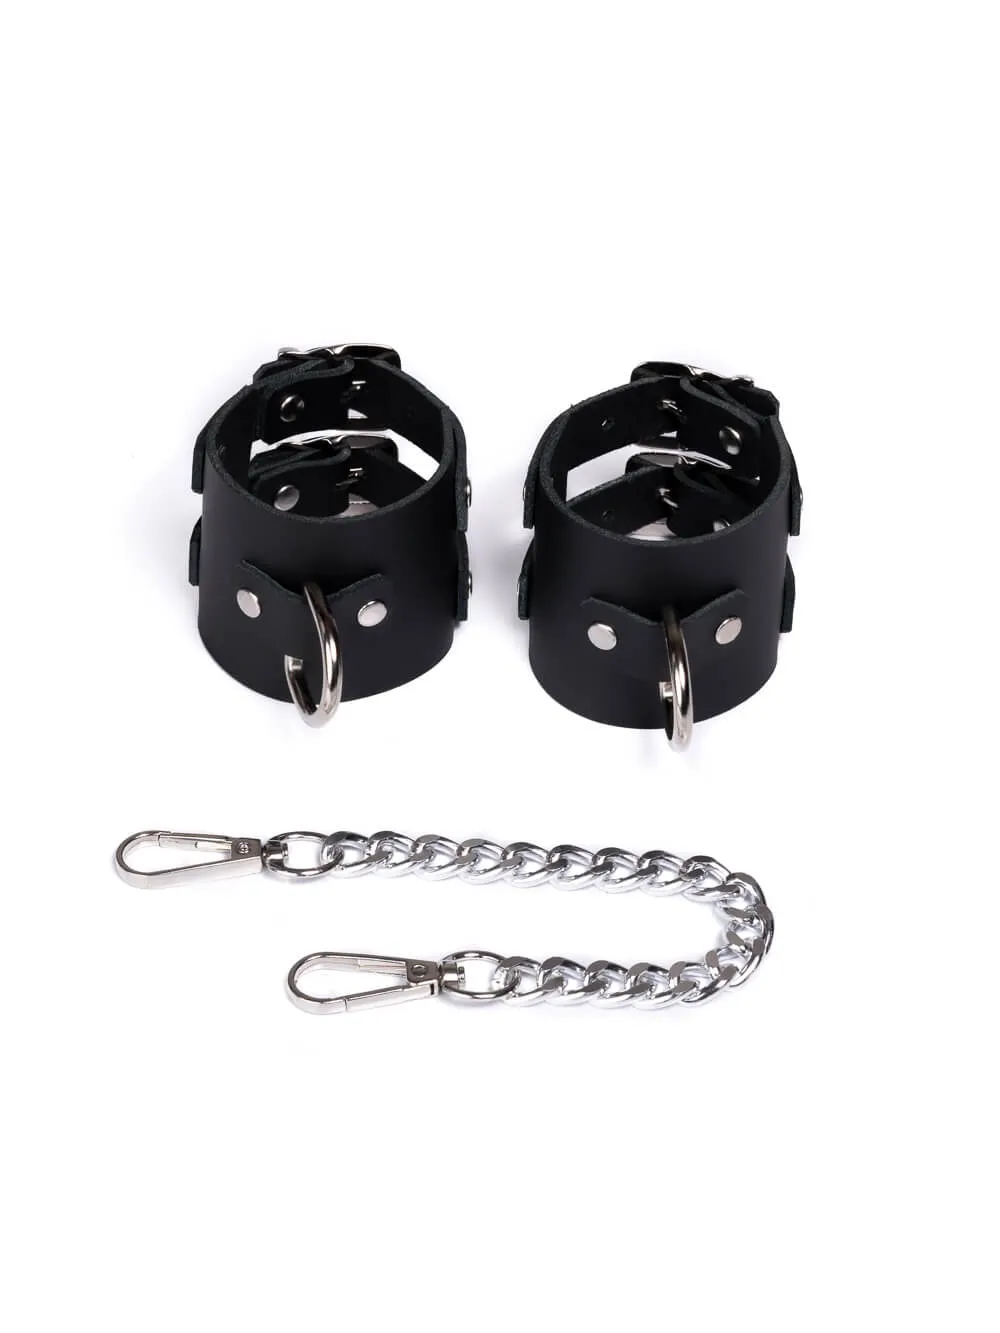 Kinky erotic leather handcuffs with a chain for tying.